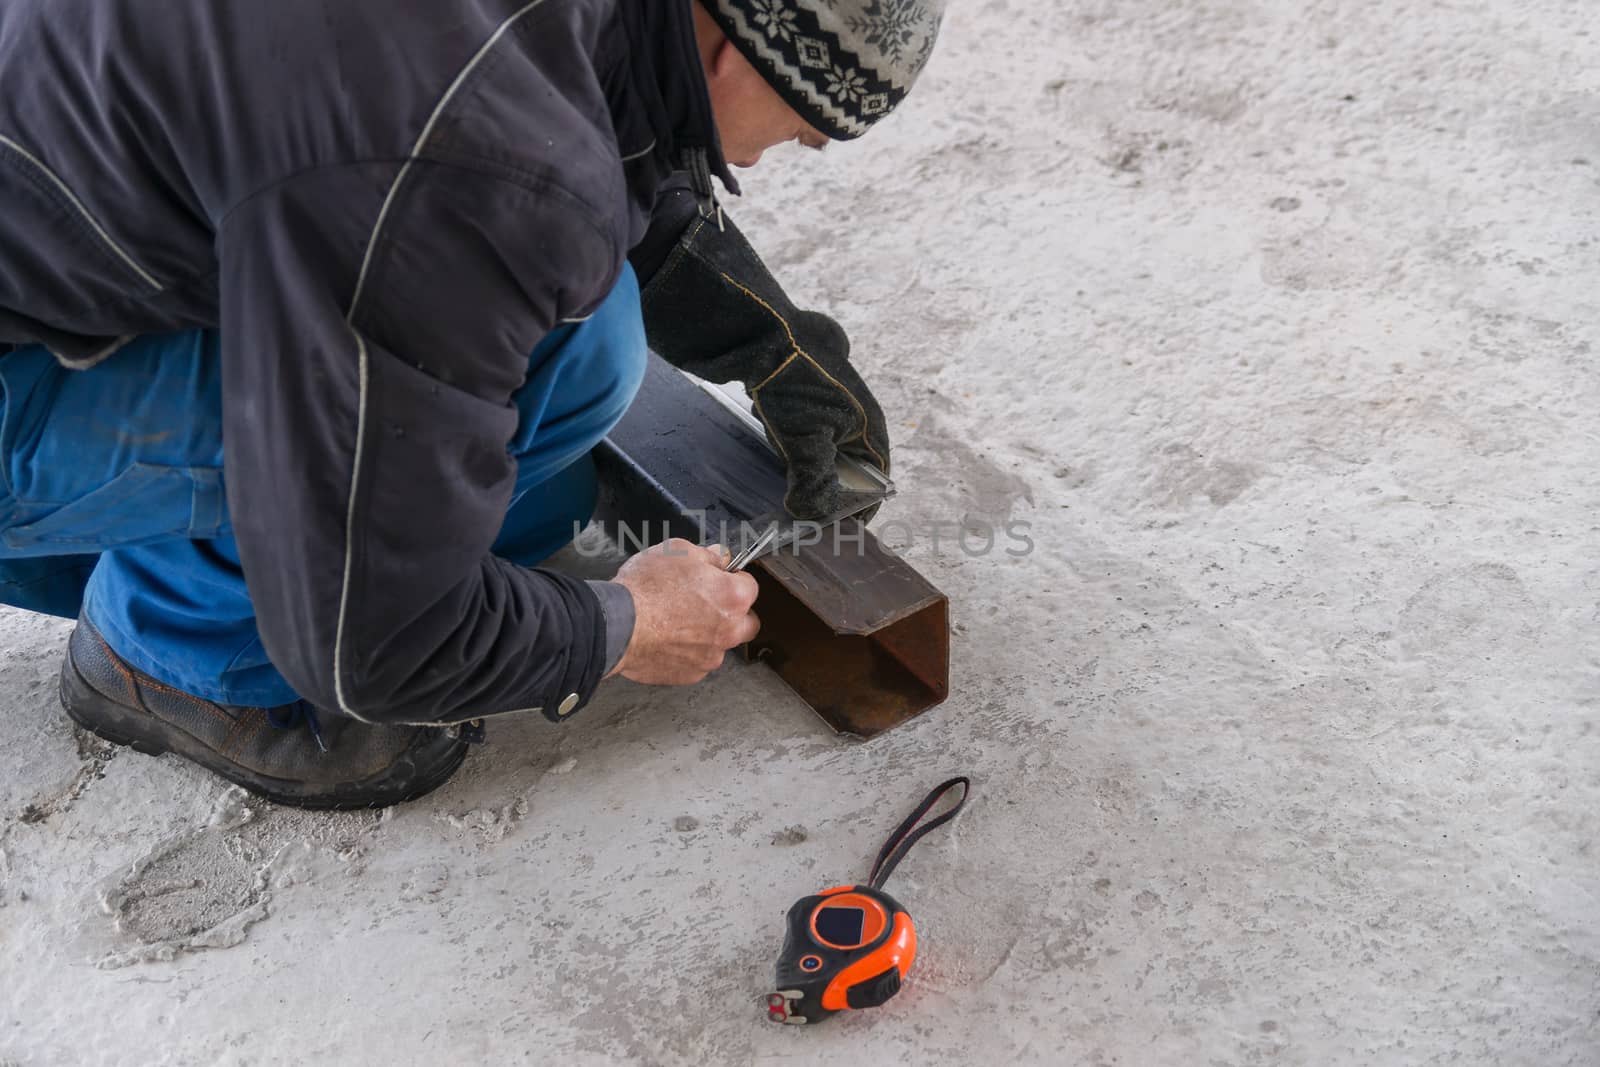 A builder draws on a square metal pipe using a locksmith on the concrete floor.